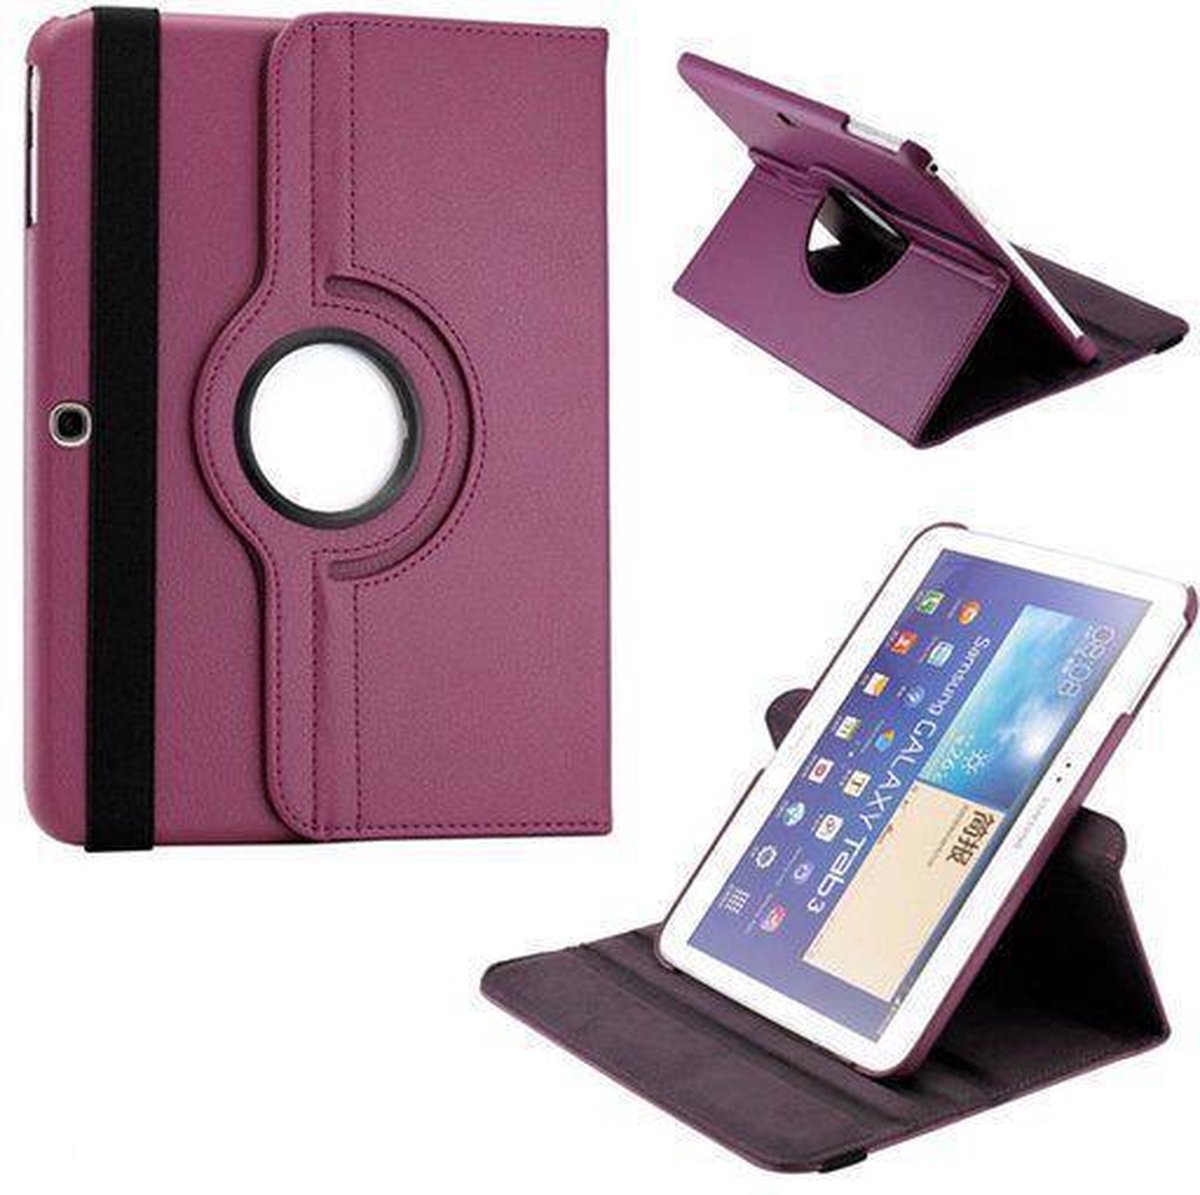 Samsung Galaxy tab 4 T530 T535 Leather 360 Degree Rotating Case Paars Purple